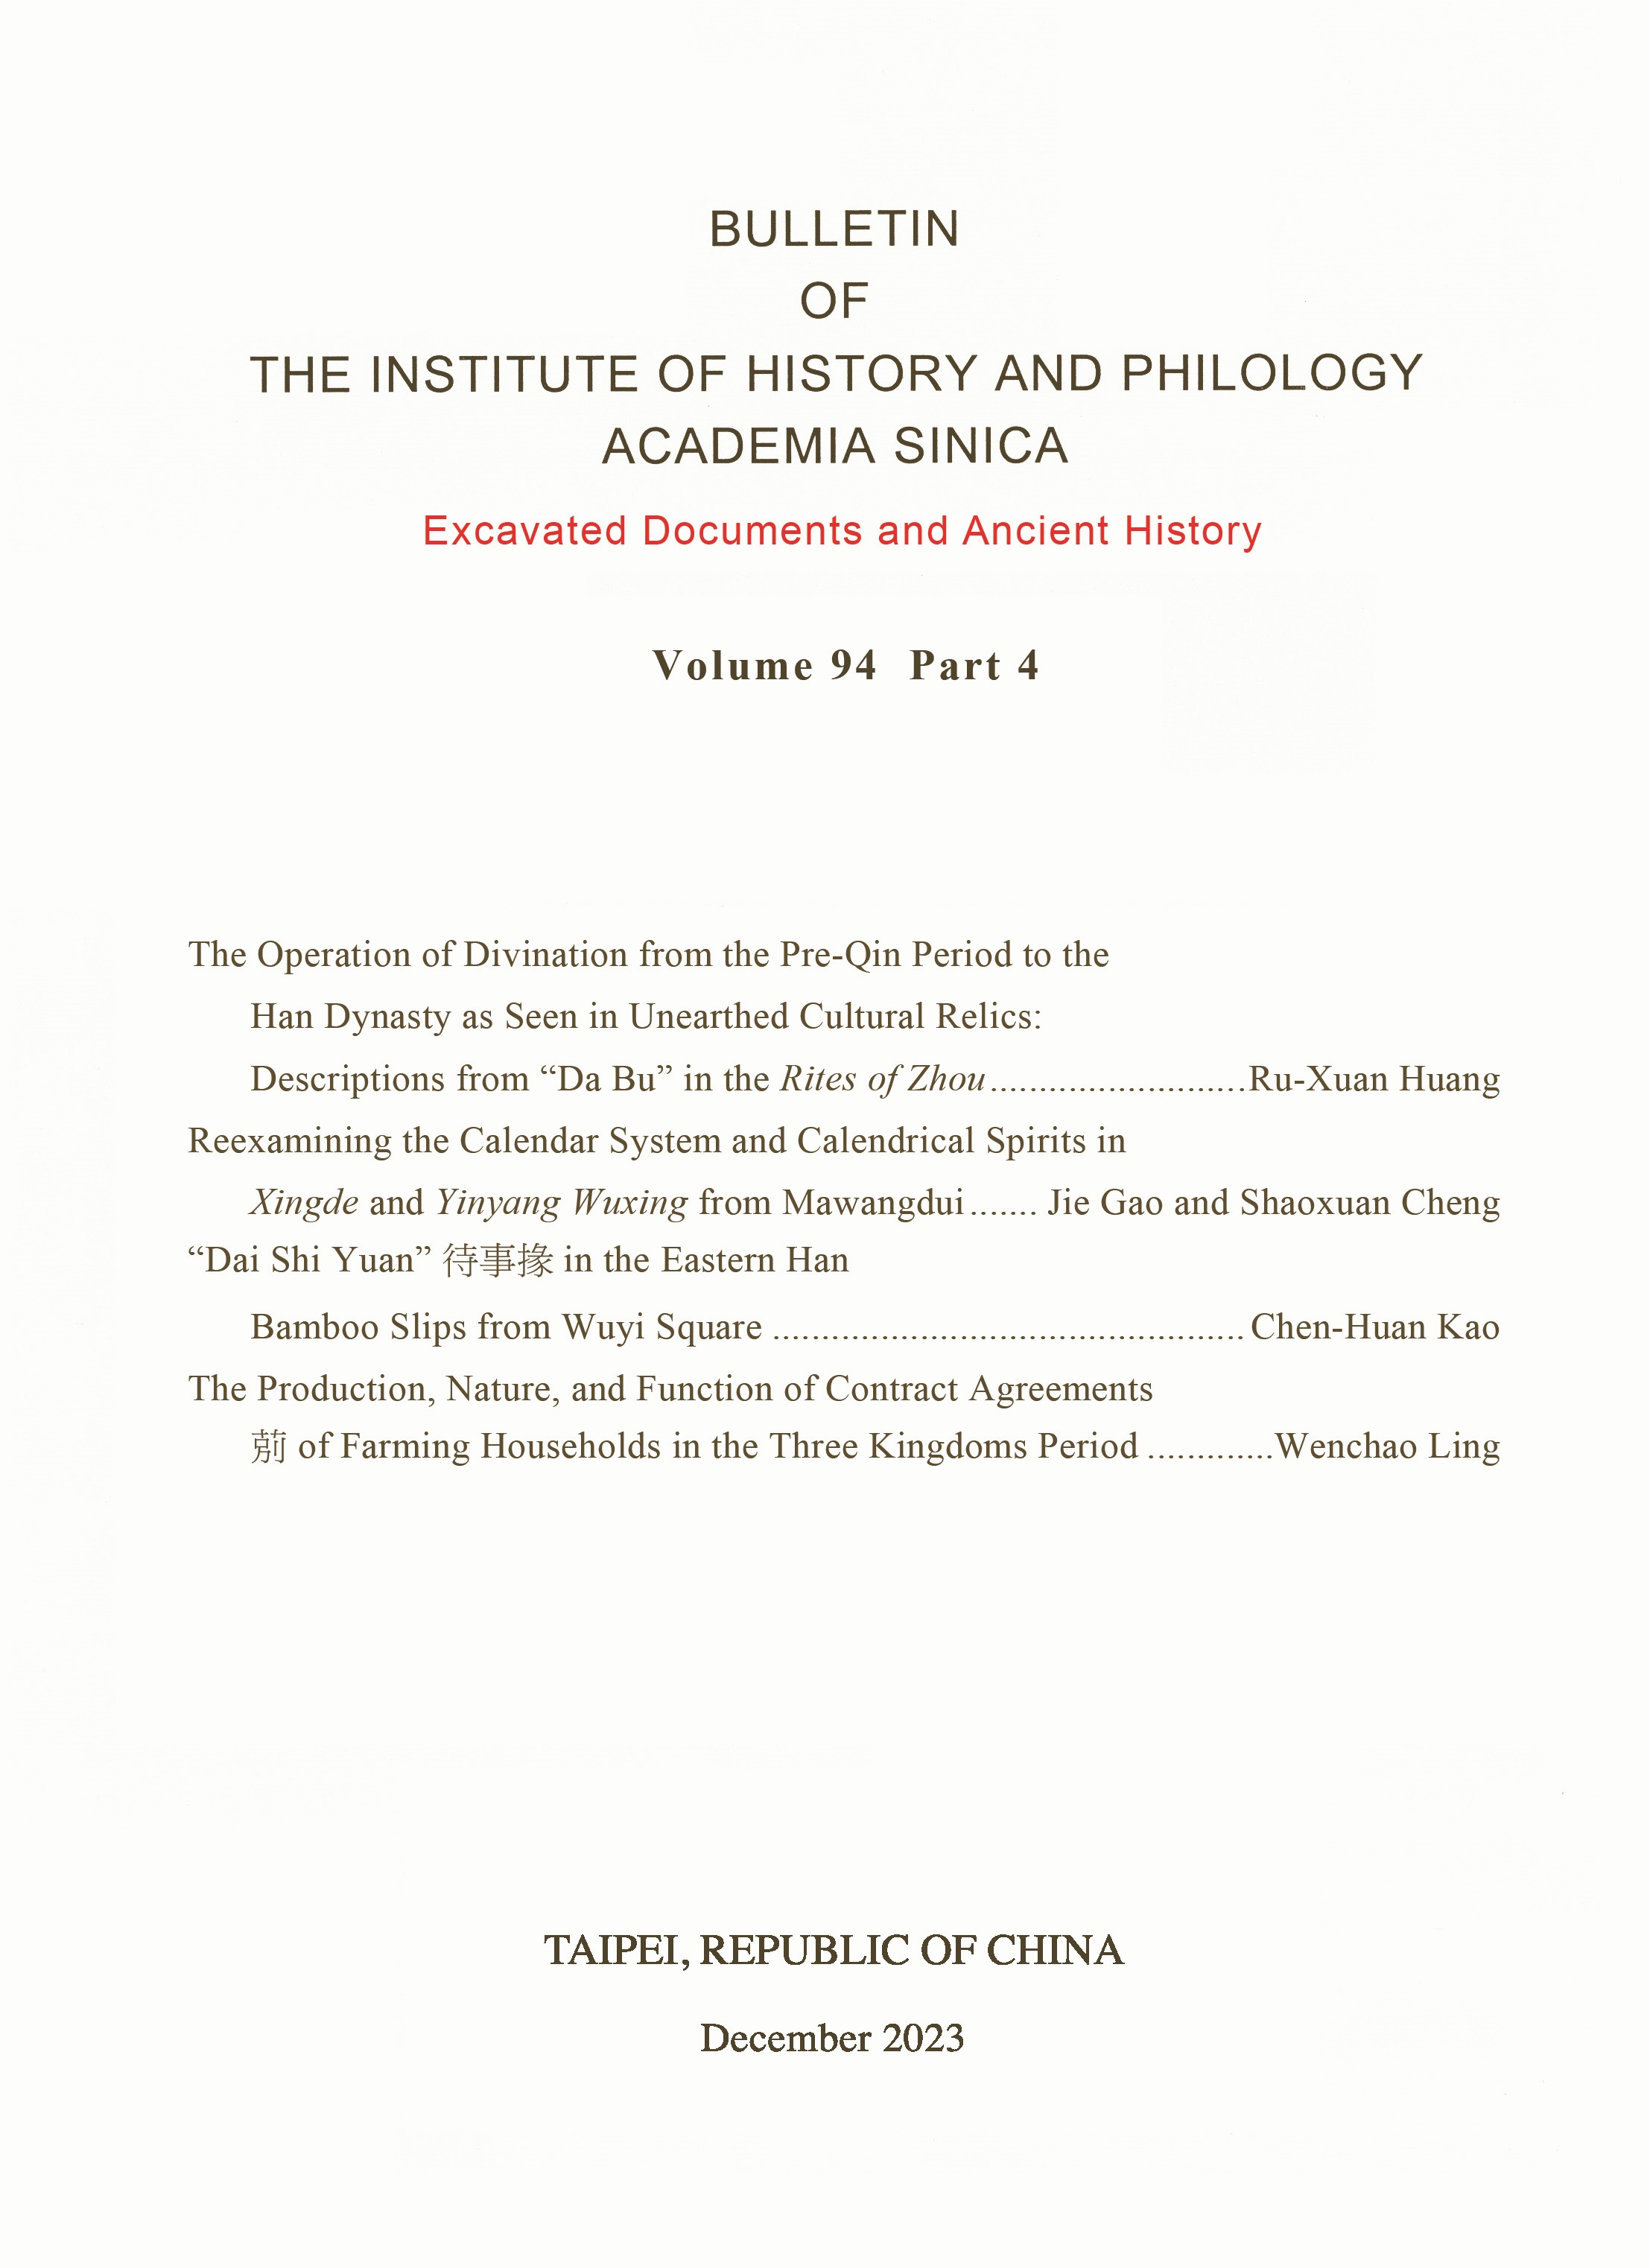 Bulletin of the Institute of History and Philology, Academia Sinica, Volume 94 Part 4